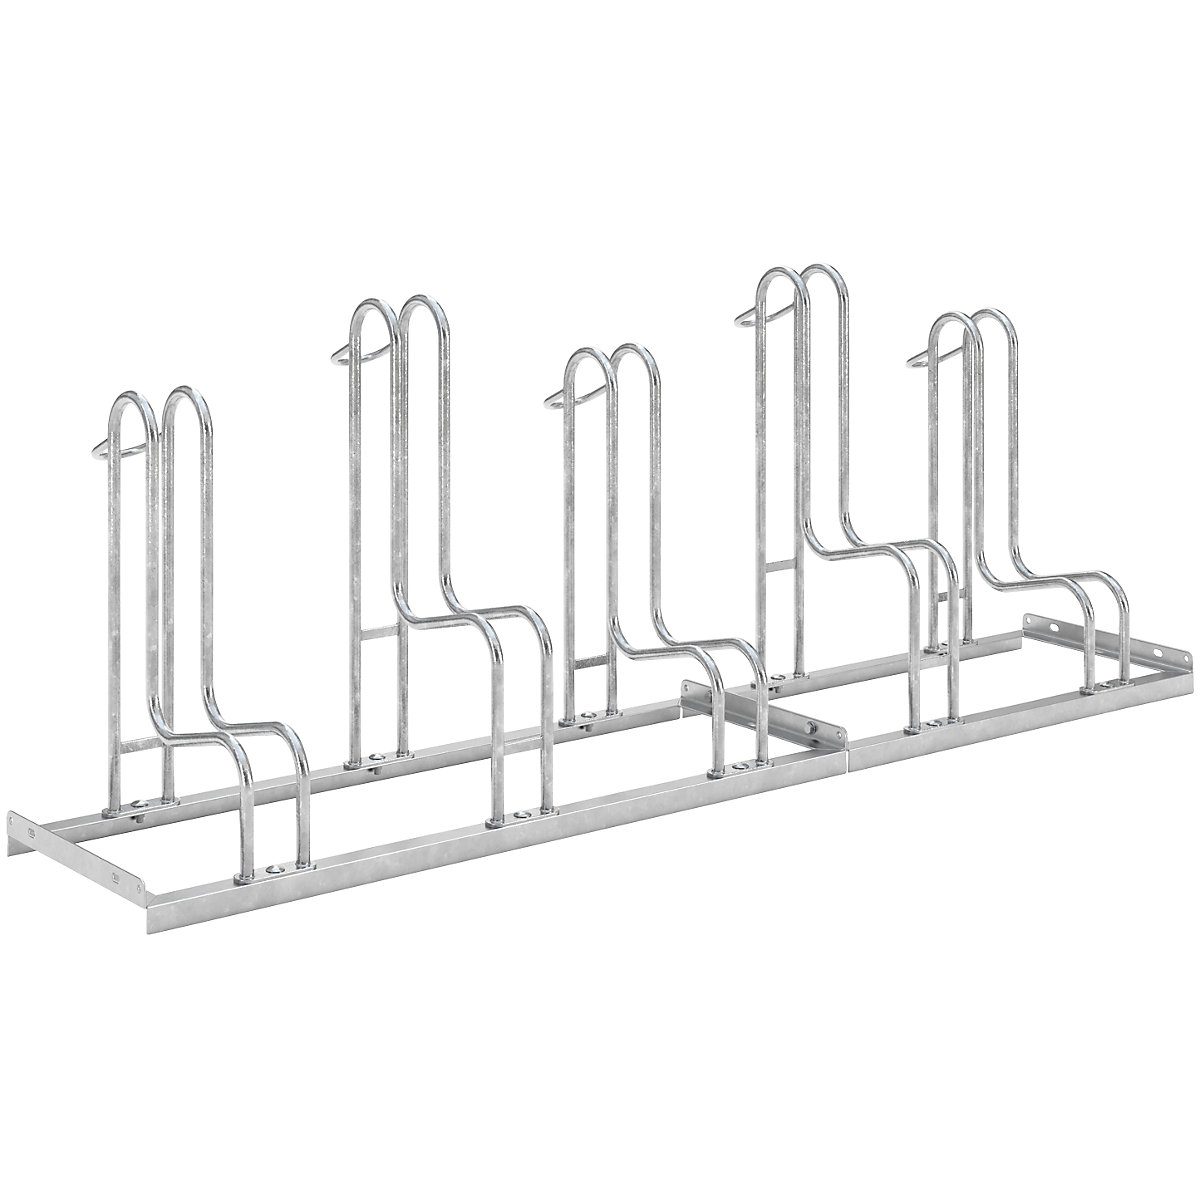 Bicycle stand, single sided, 5 parking spaces, tyre width up to 64 mm